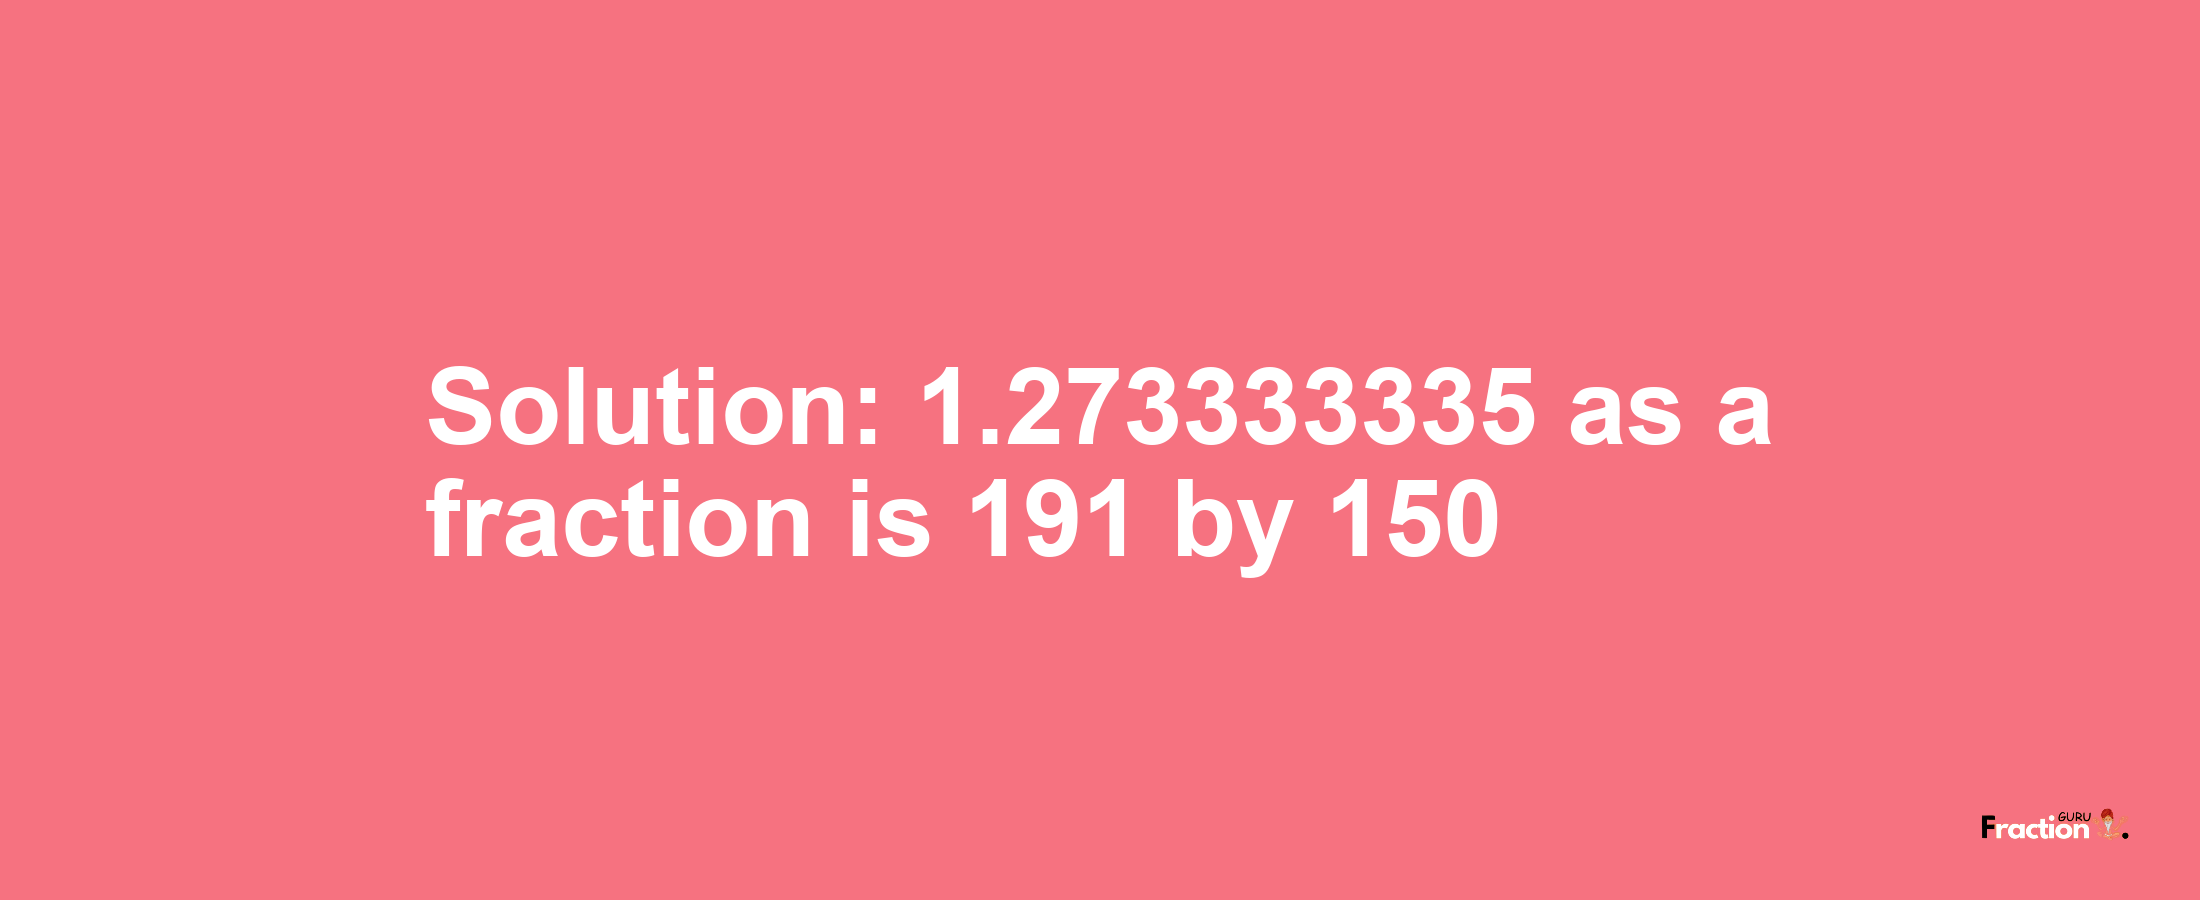 Solution:1.273333335 as a fraction is 191/150